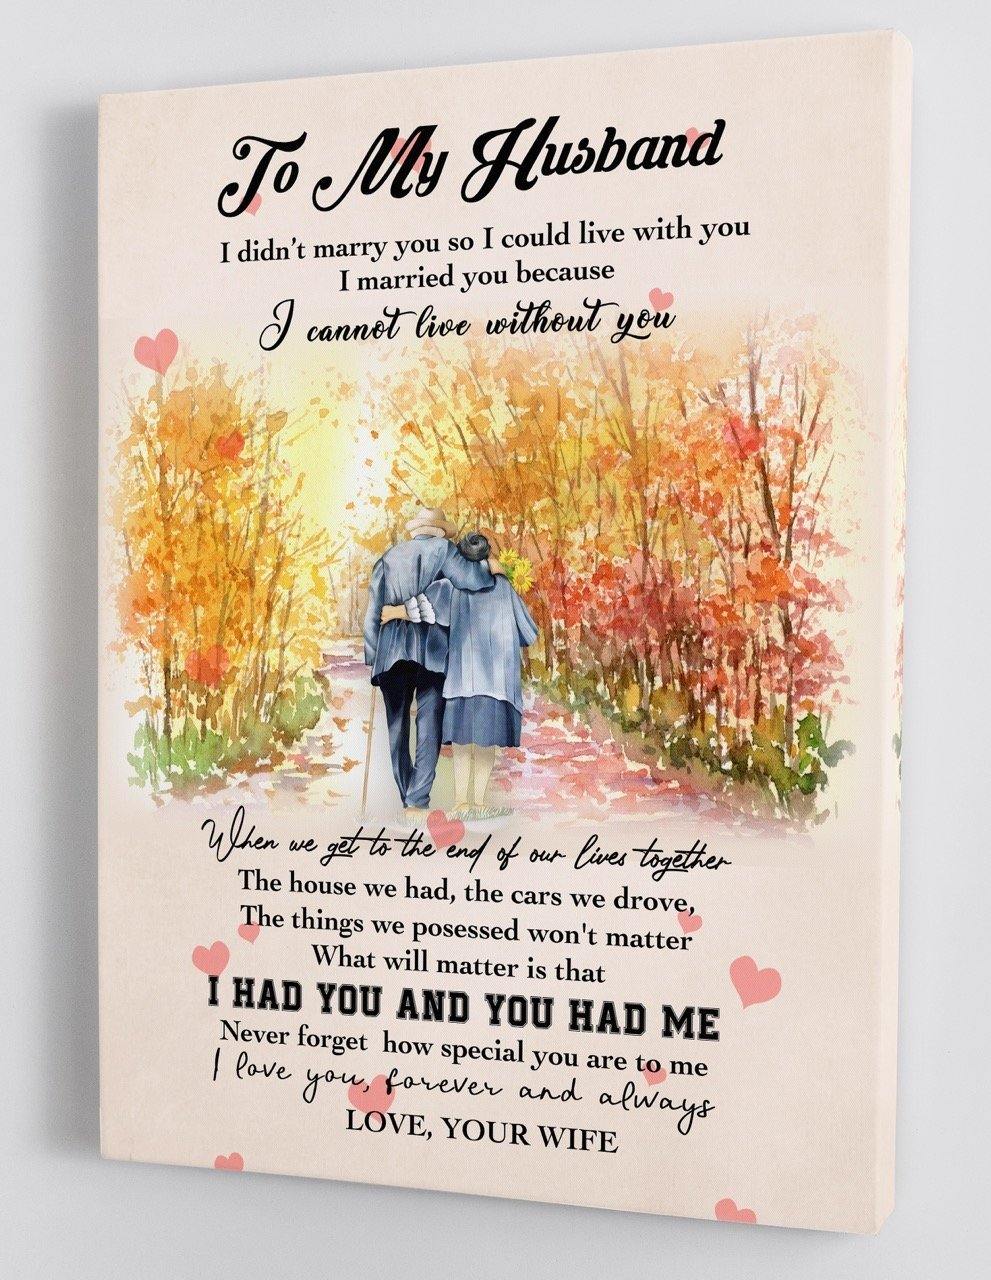 To My Husband - From Wife - Framed Canvas Gift WH005 - DivesArt LLC